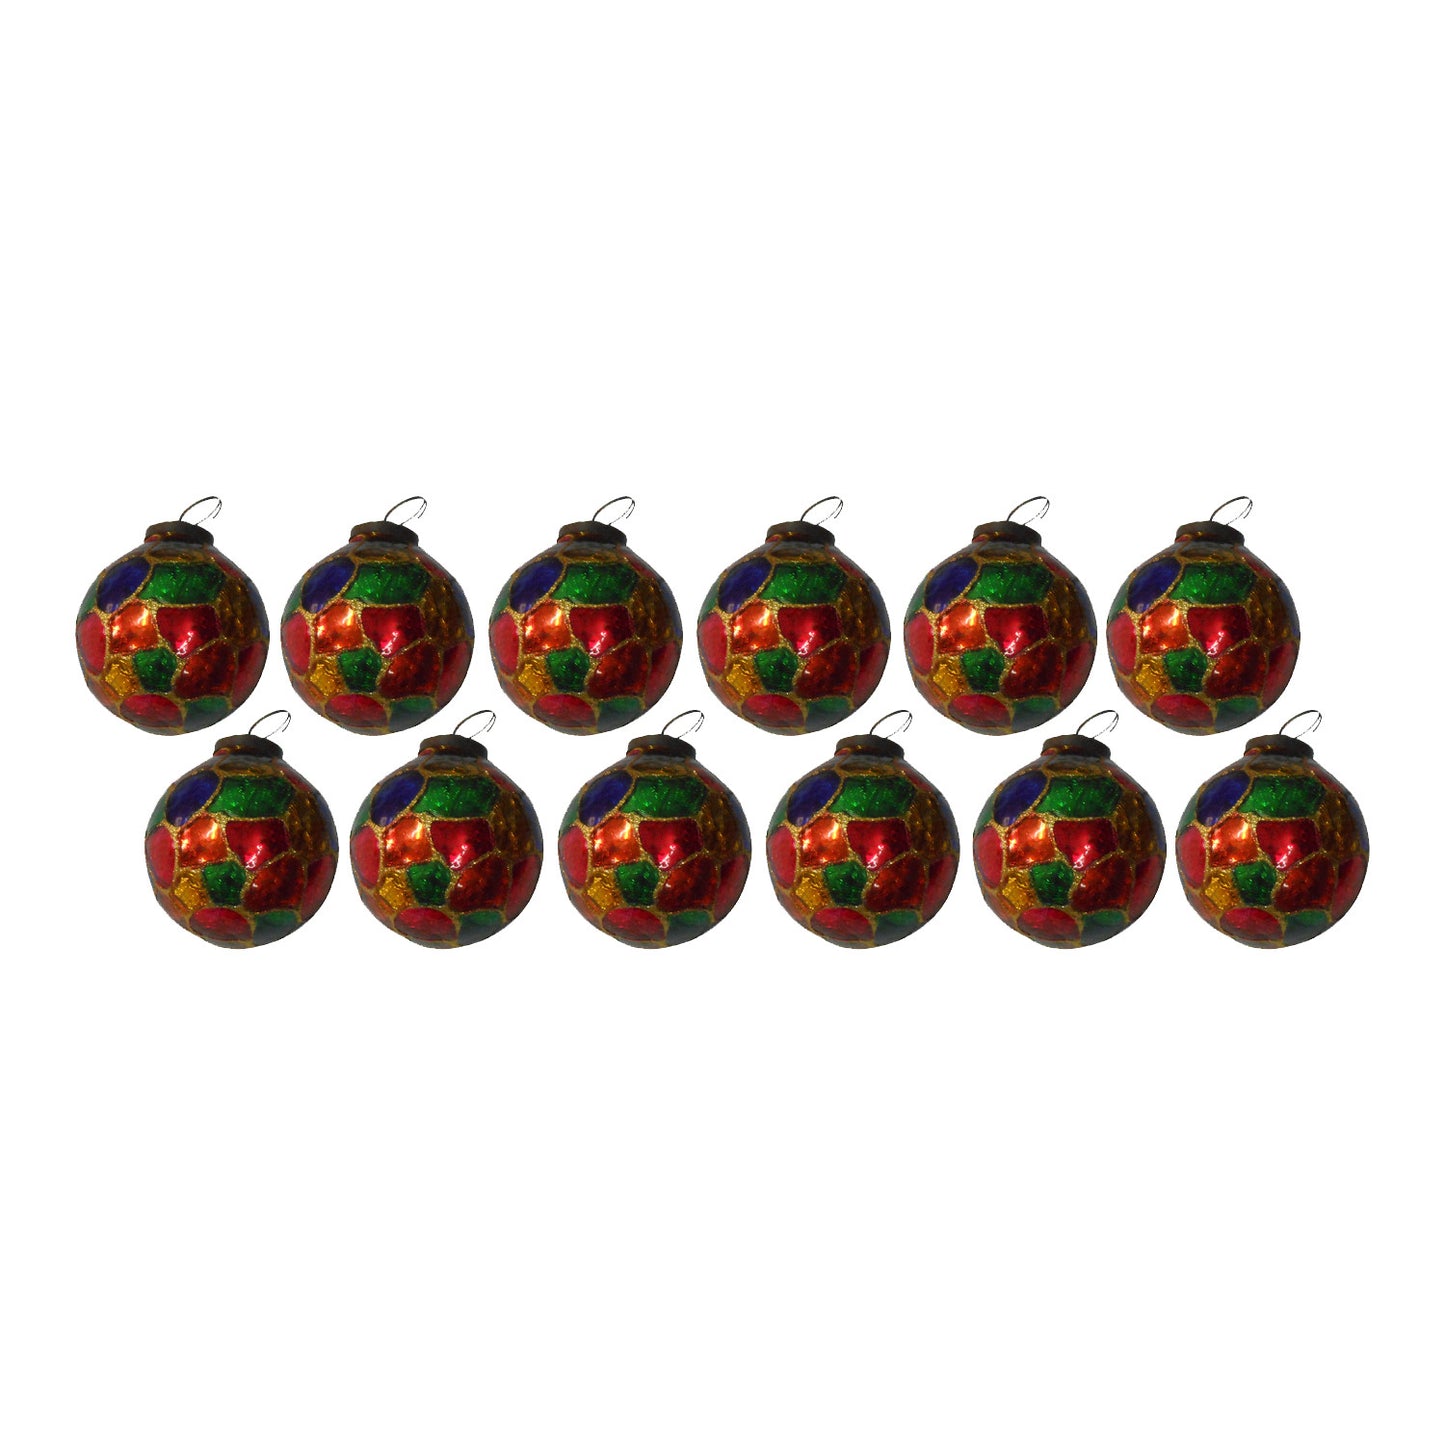 GiftBay Creations ORN-125(S/12) Antique-look Glass Ornament 3" H, Set of 12 for Christmas Tree Decoration